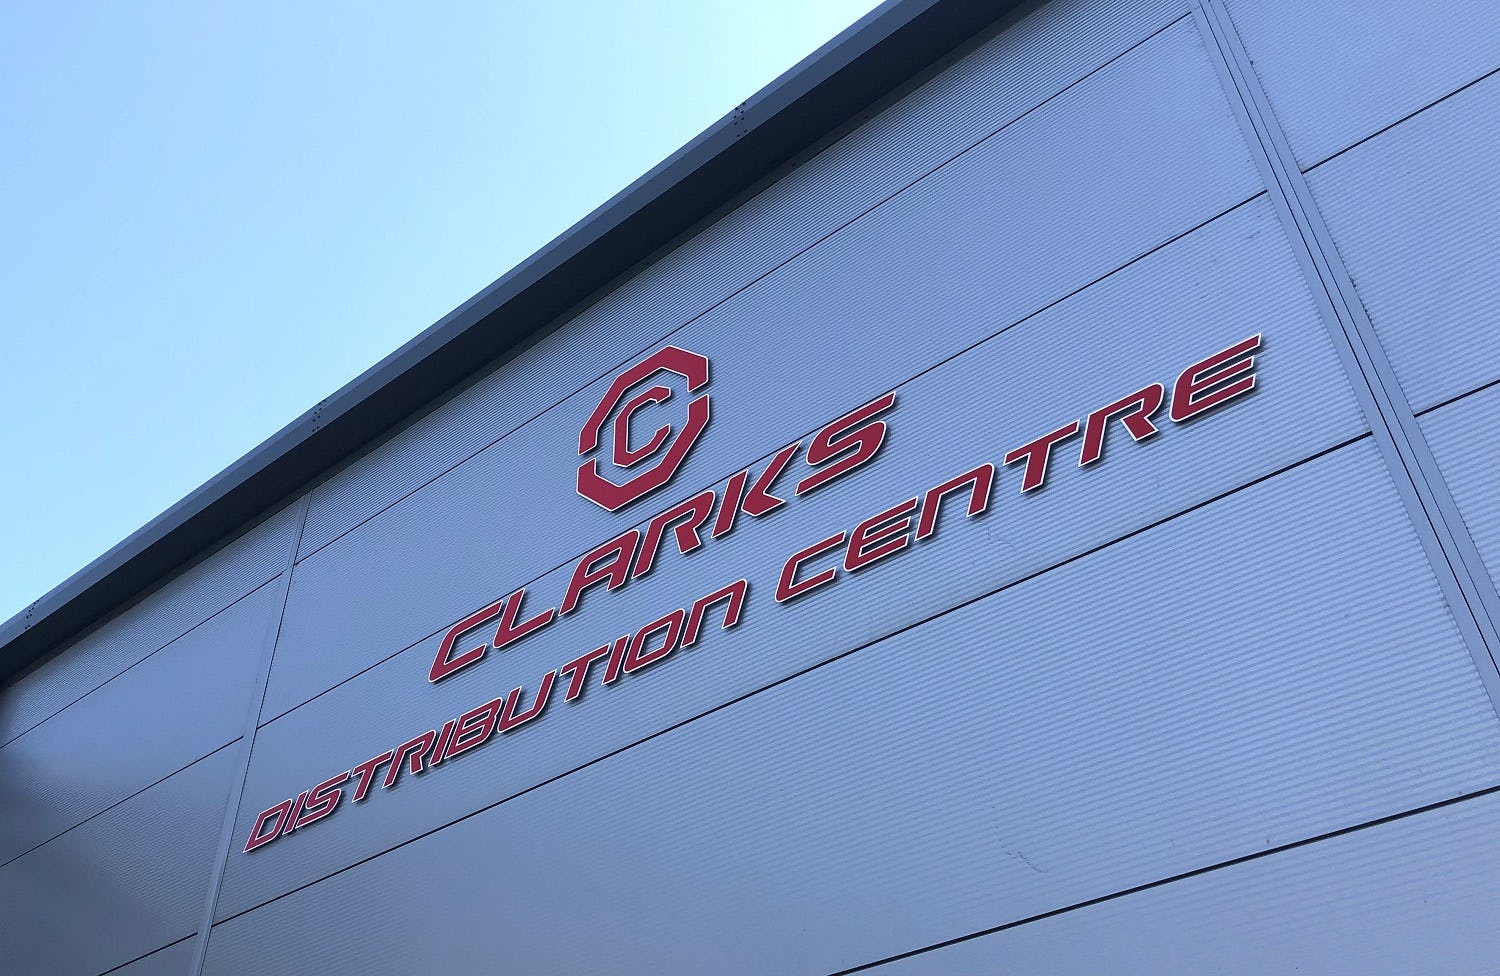 New distribution centre for speeding up deliveries and for wider range of stocked product. – Photos Clarks Cycle Systems